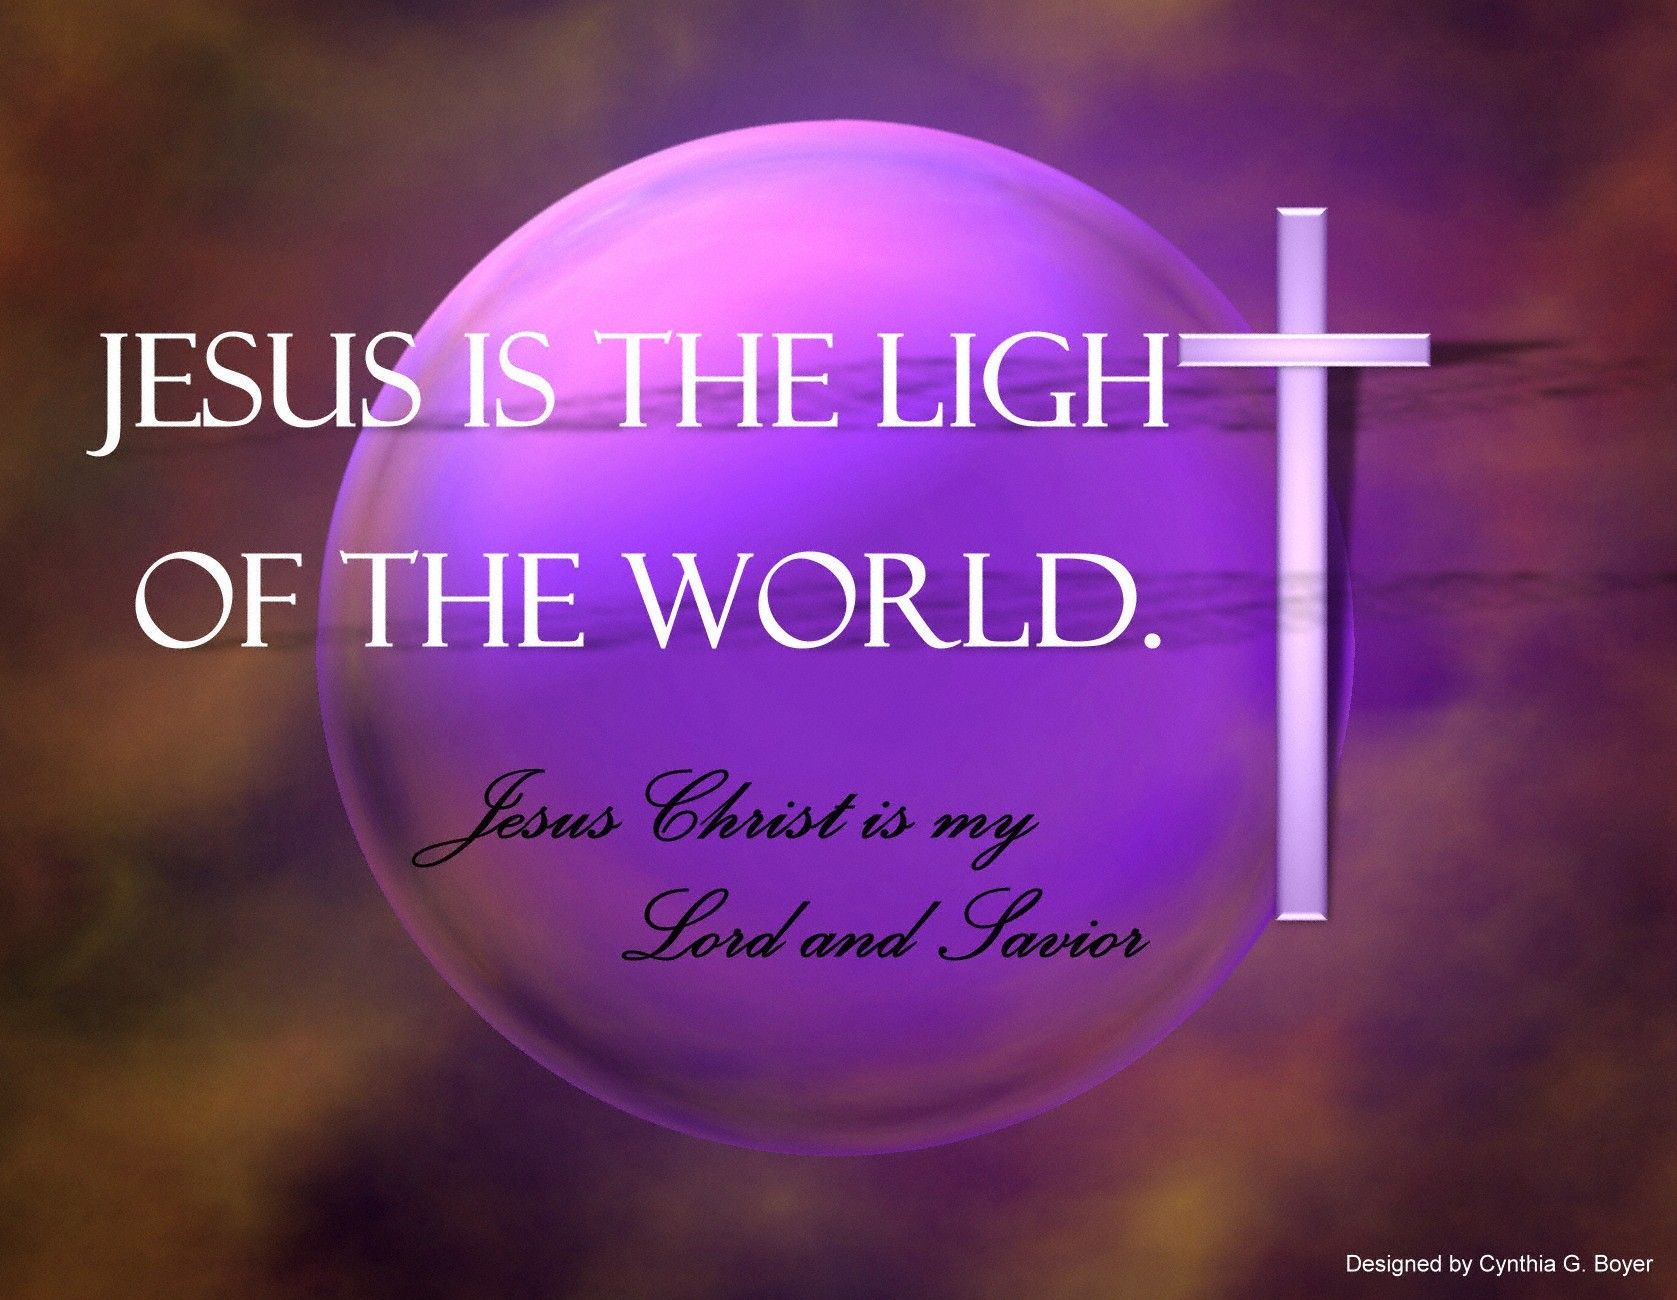 Jesus christ on the cross wallpaper picture Download